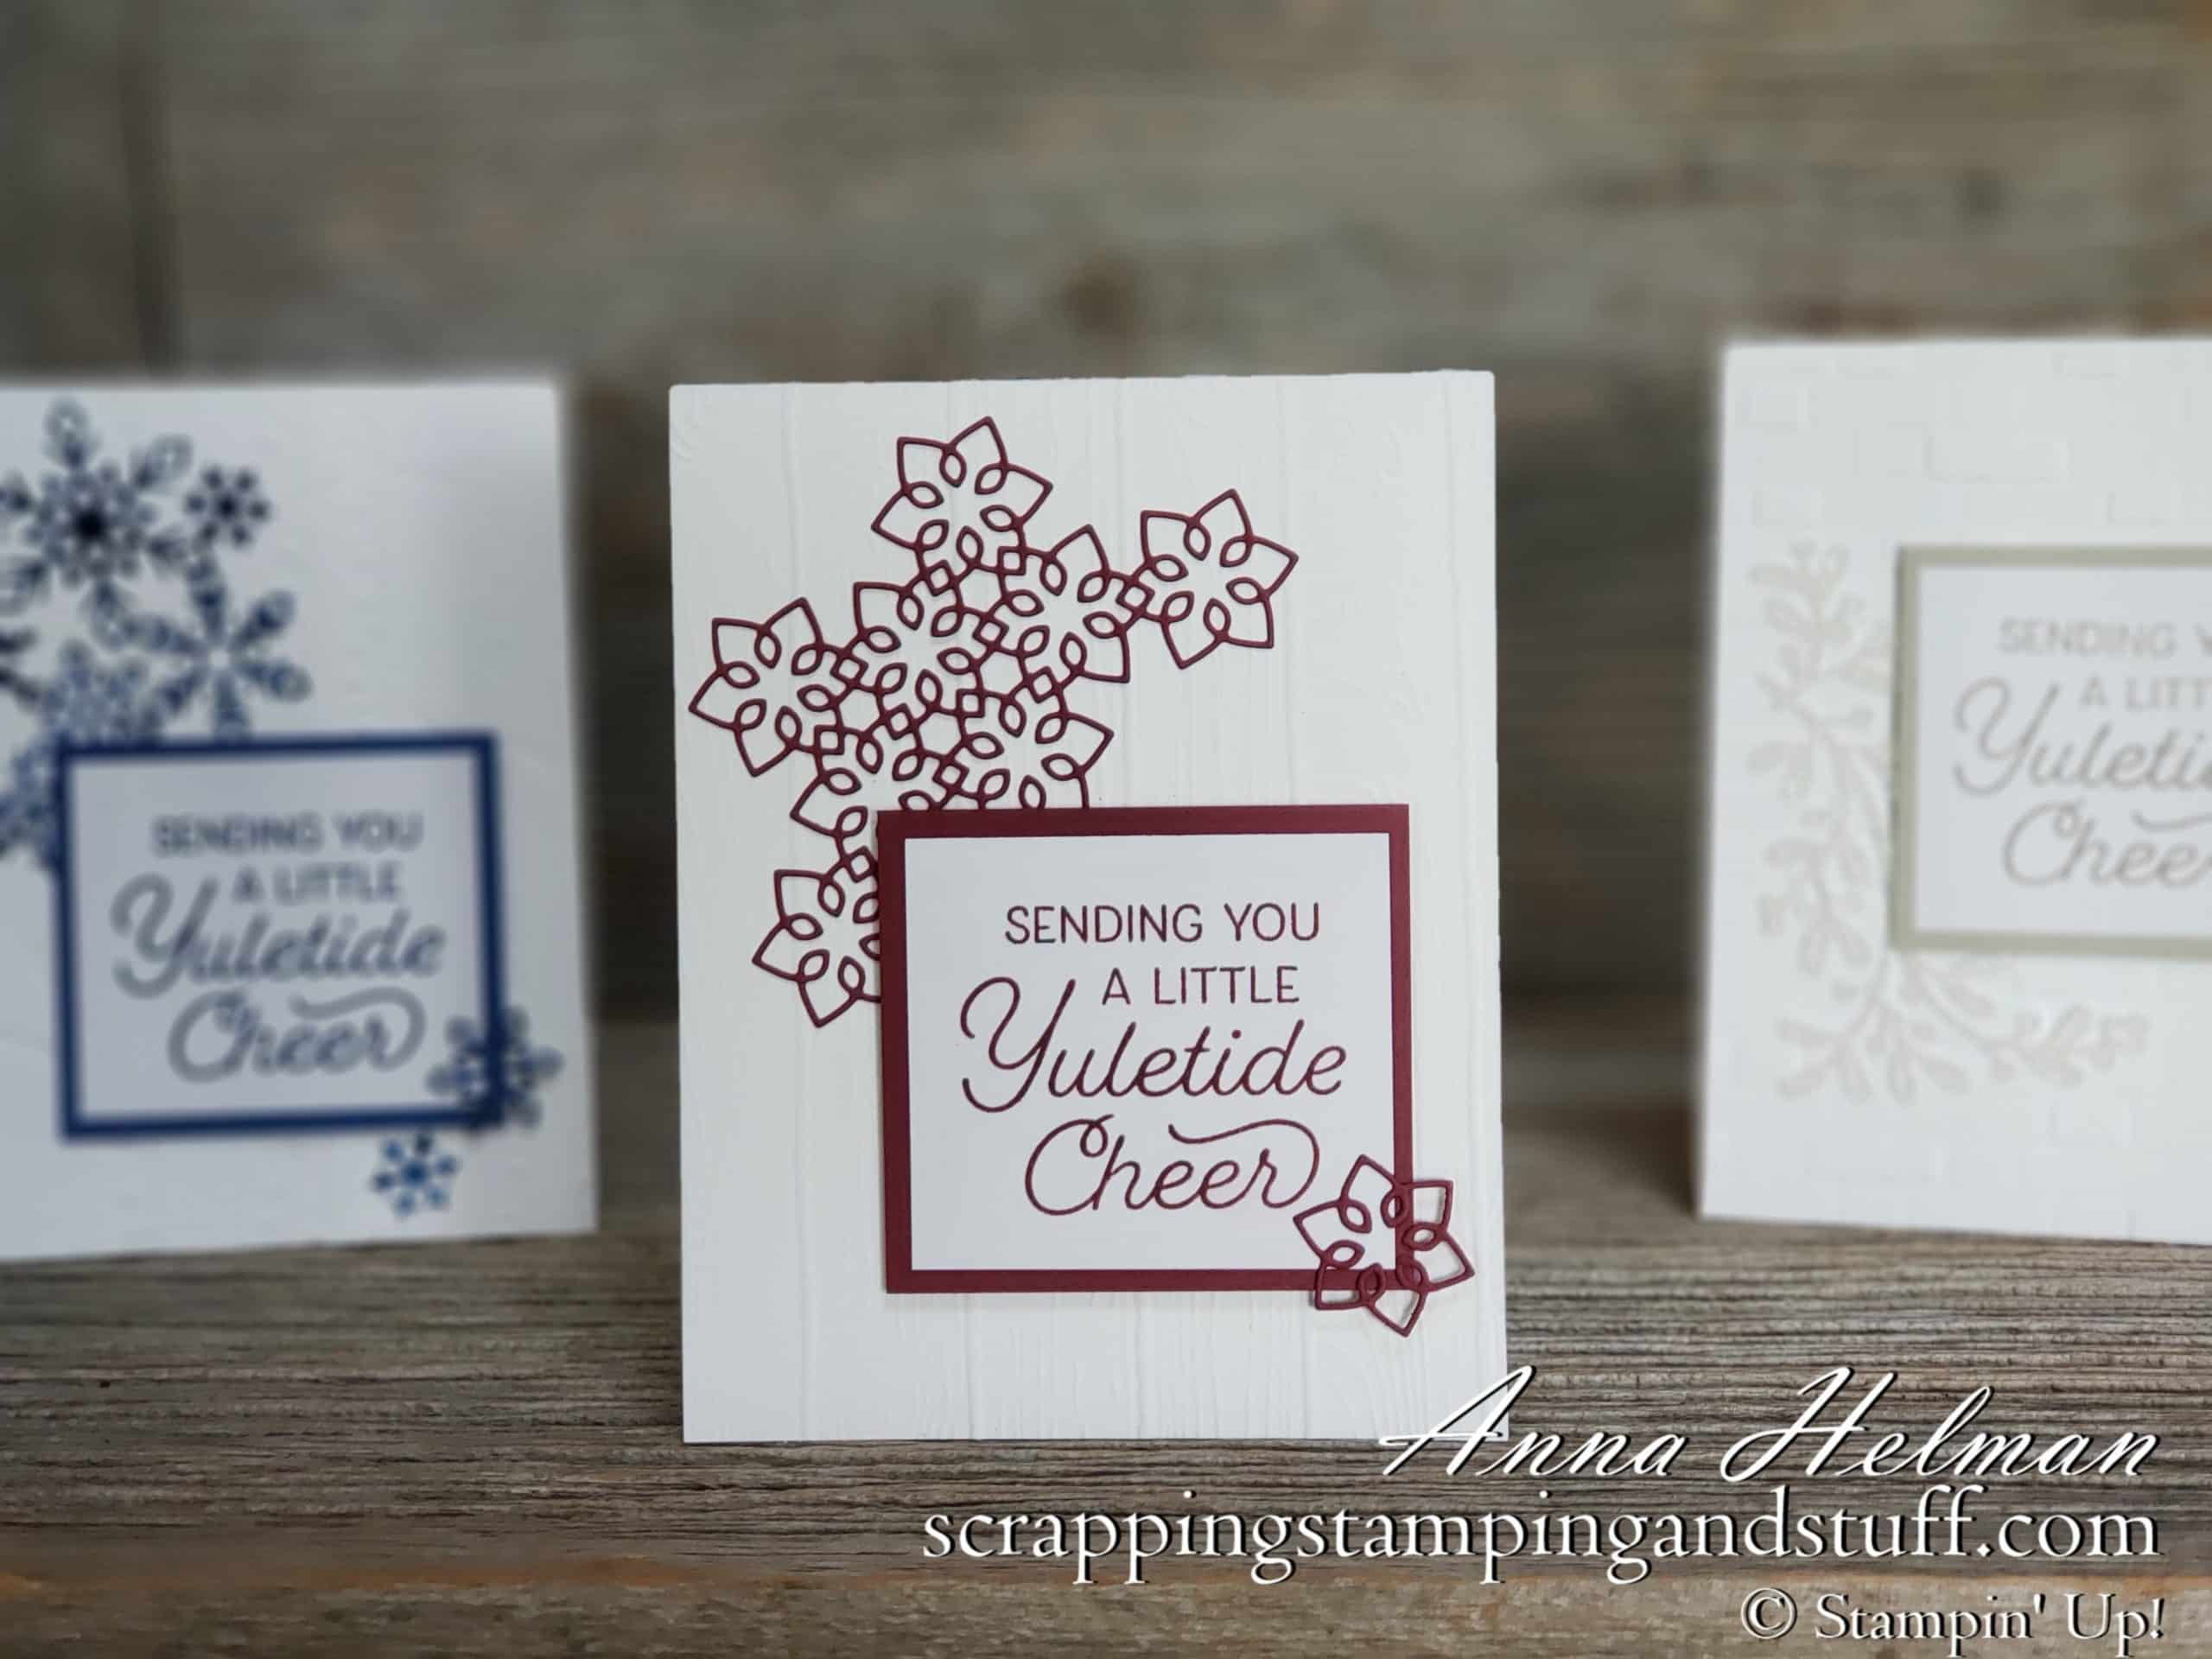 Clean and simple Christmas card ideas using the Stampin Up Christmas Layers dies and Frosted Foliage stamp set